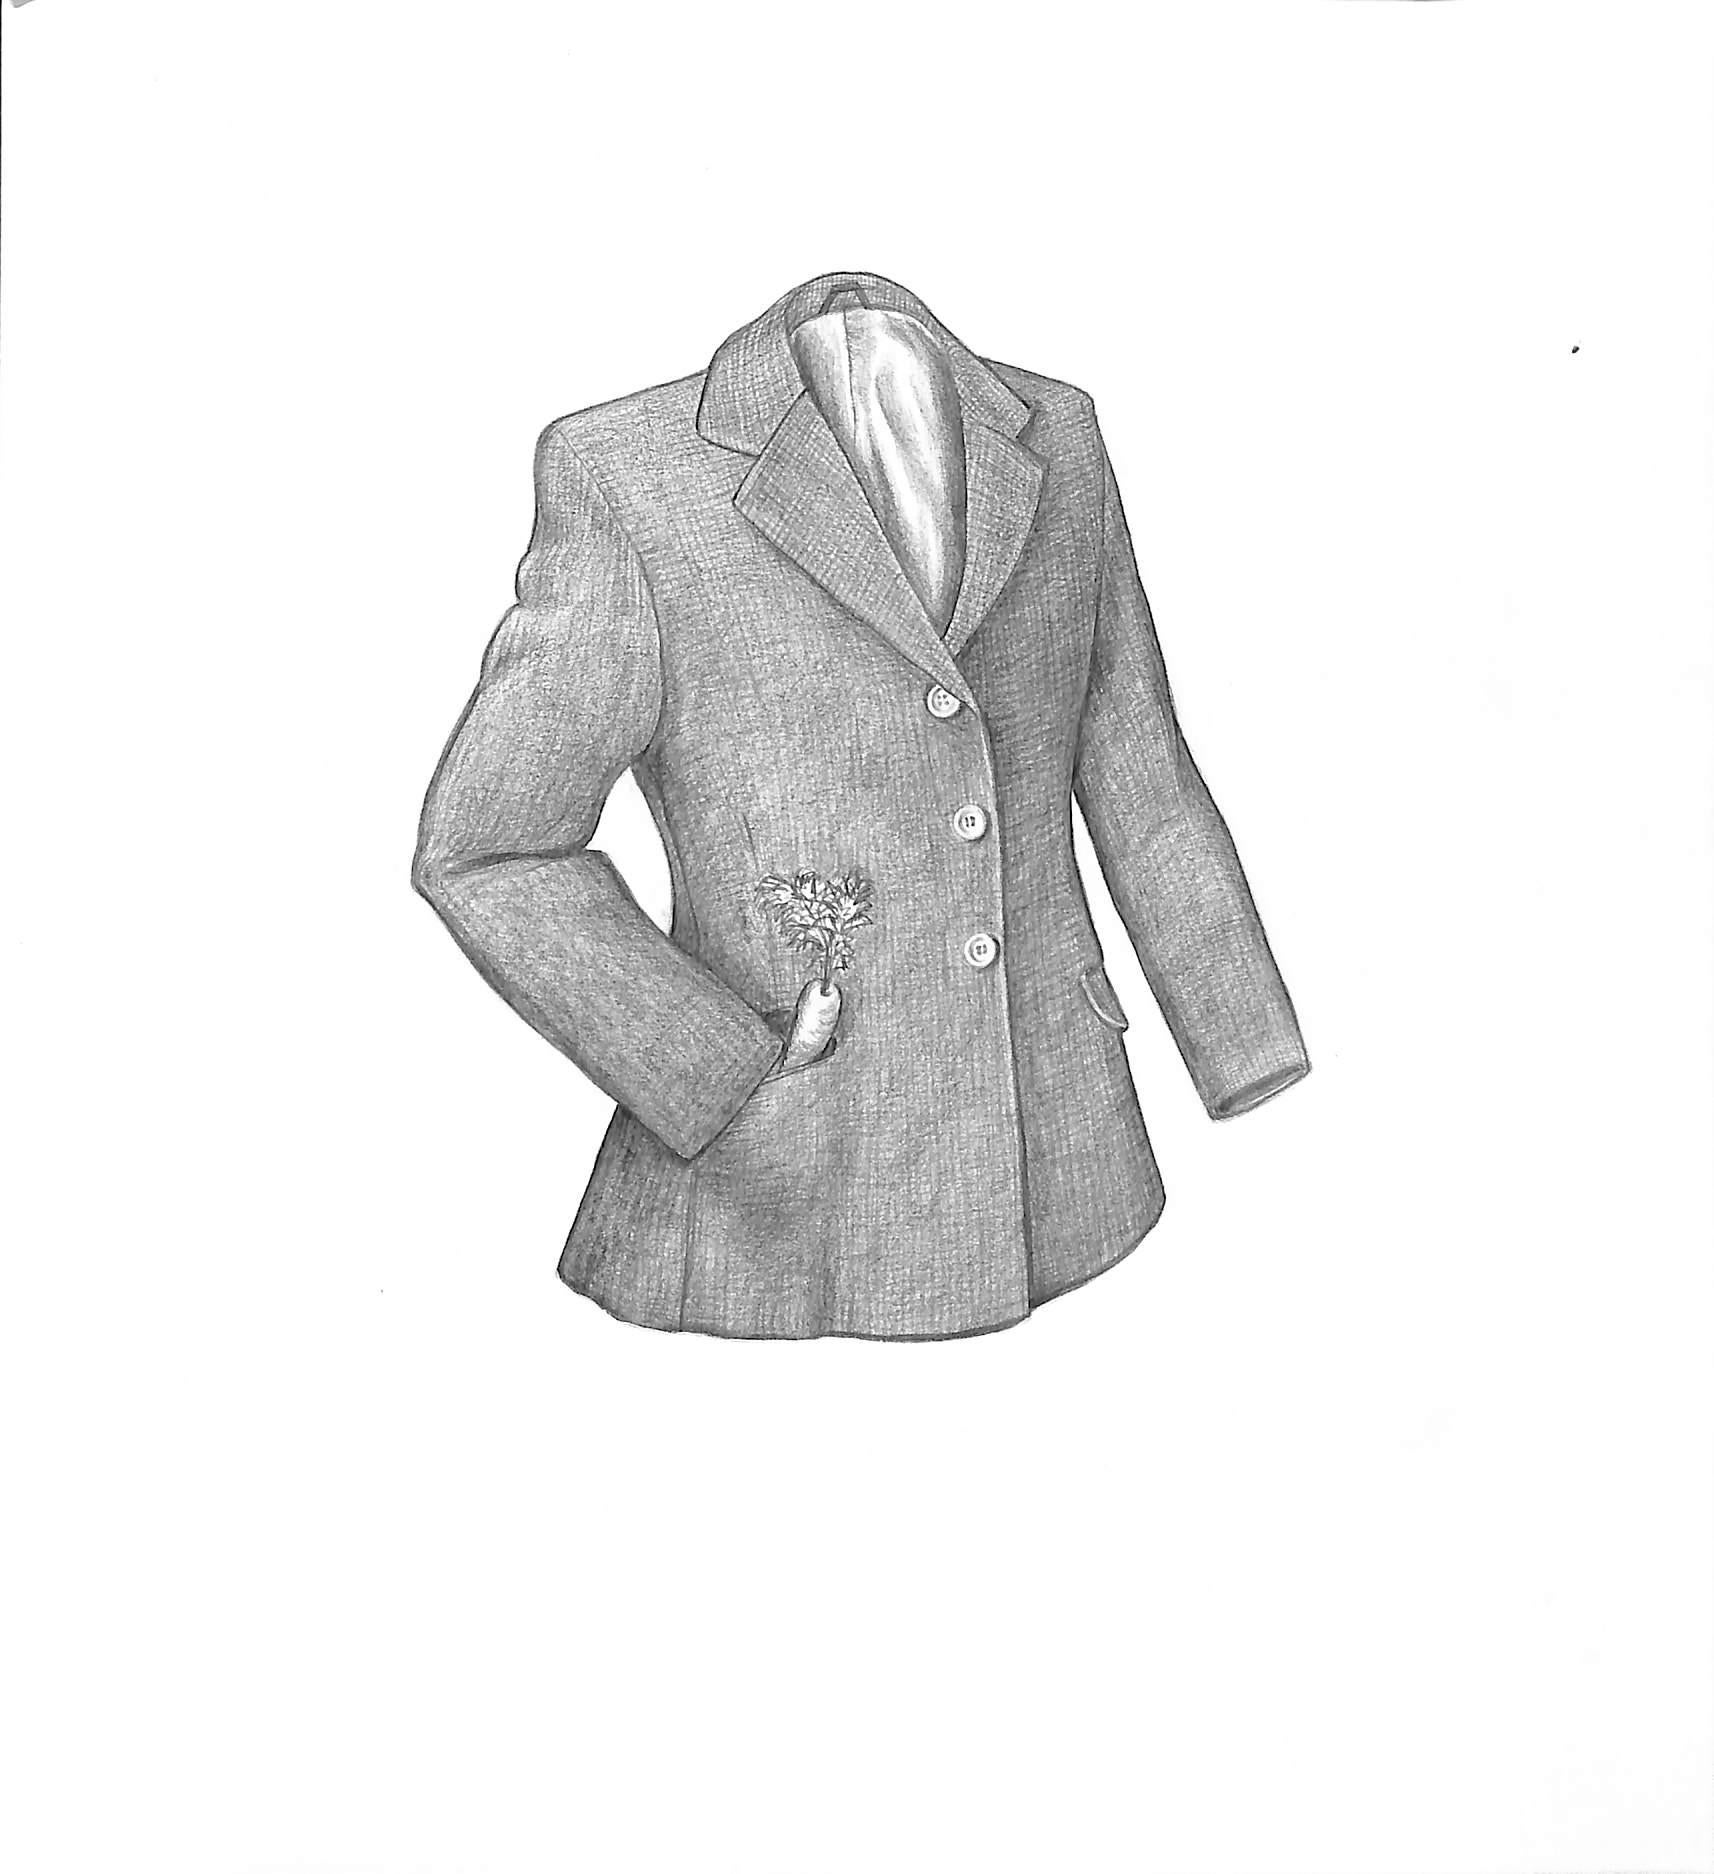 Children's Tweed Coat 2002 Graphite Drawing - Art by Unknown